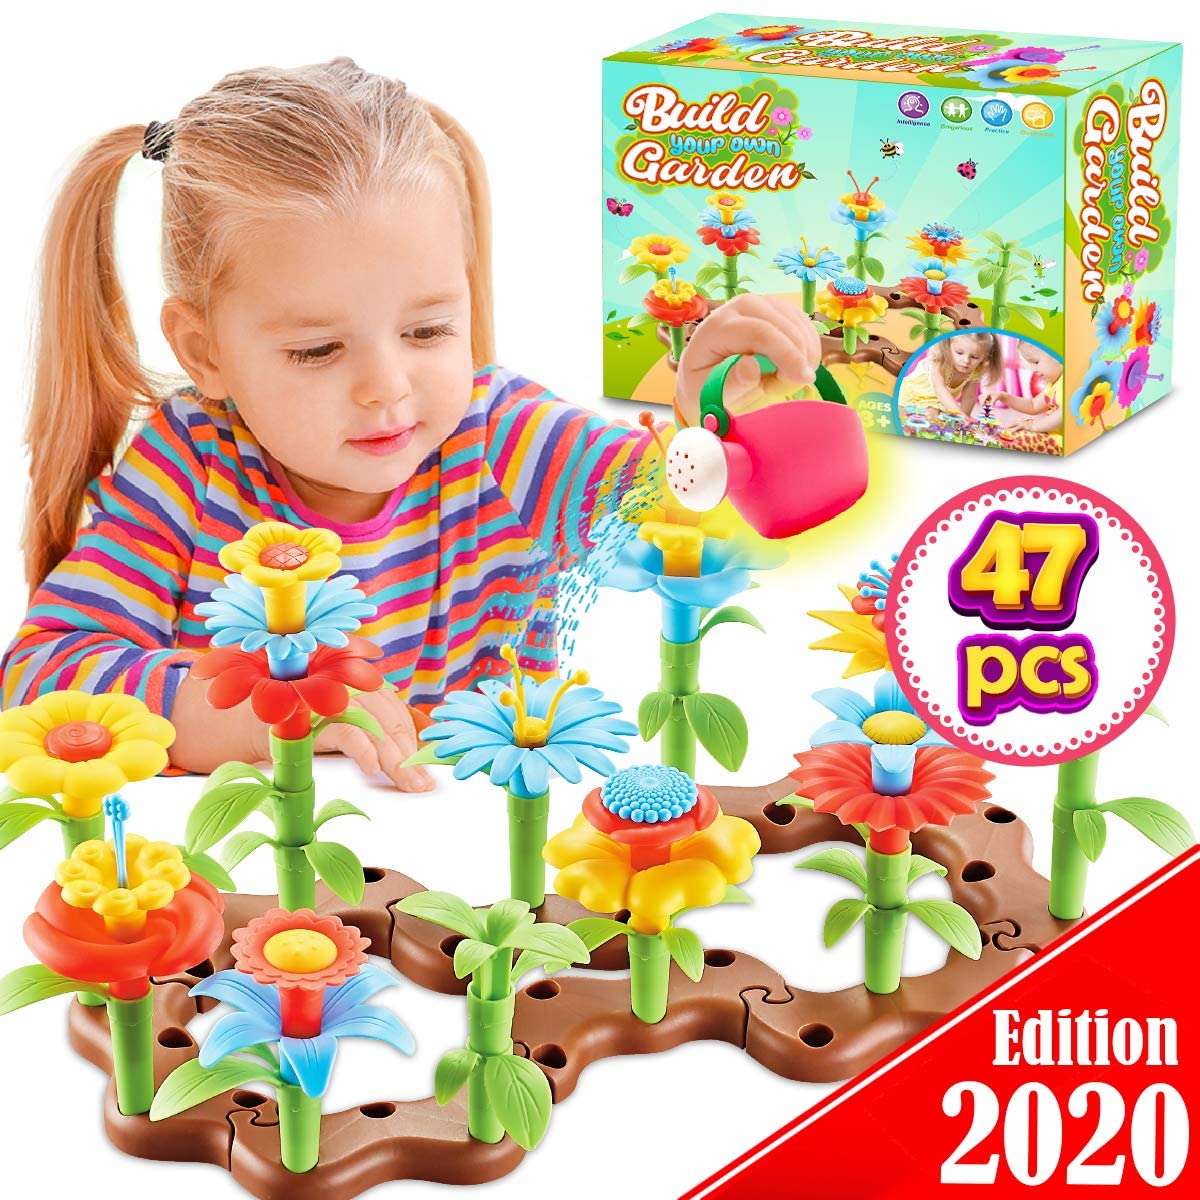 Stacking Game for Toddlers Playset Gardening Pretend Gift for Girls Kids STEM Toy siicaaG Flower Garden Building Toys Educational Activity for Preschool Children Age 3 4 5 6 Year Old 